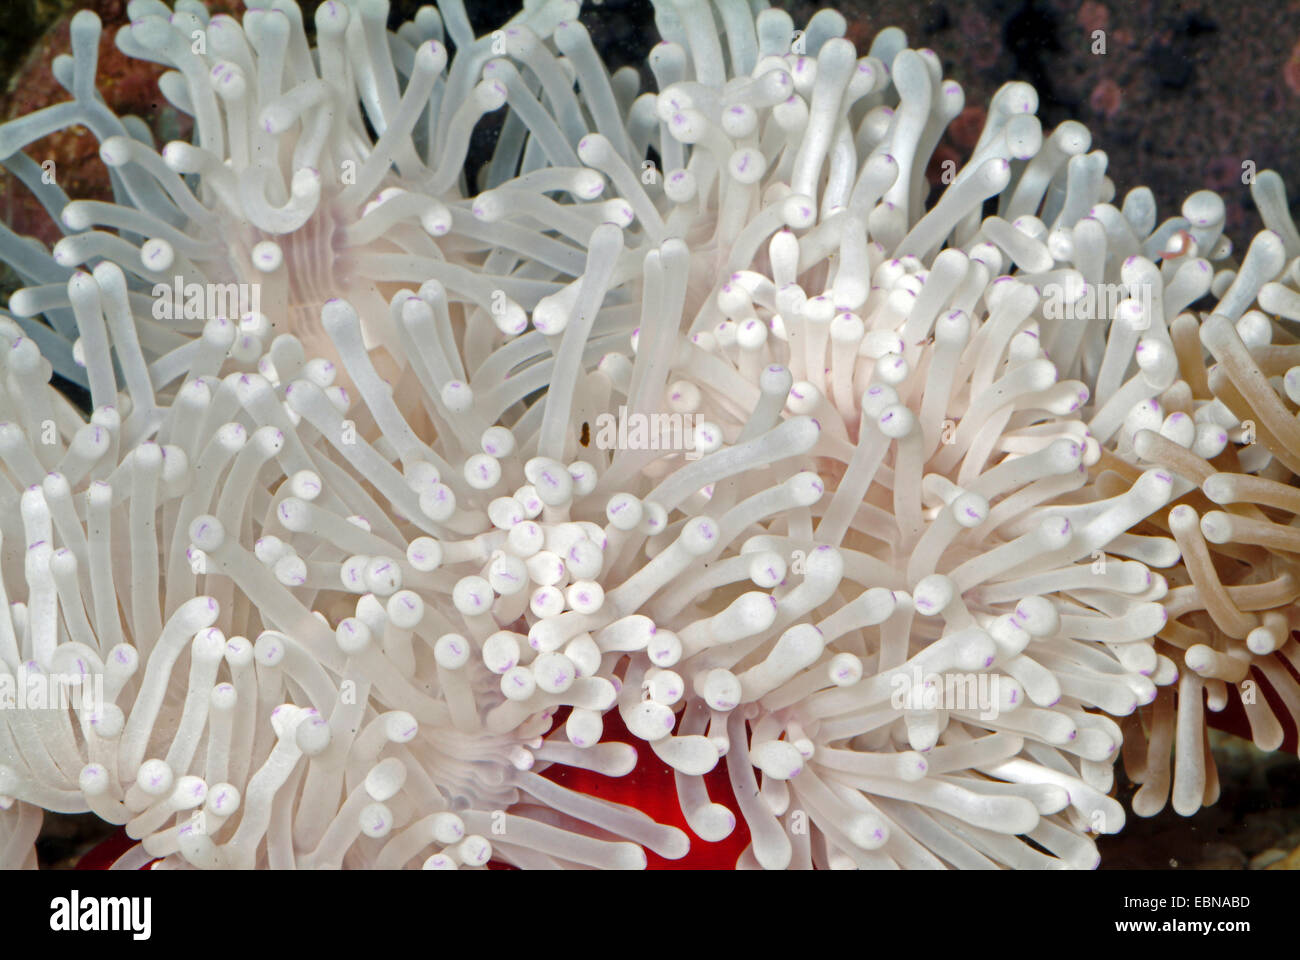 magnificent anemone, magnificent sea anemone (Heteractis magnifica), high angle view onto the tentacles of a magnificent anemone Stock Photo